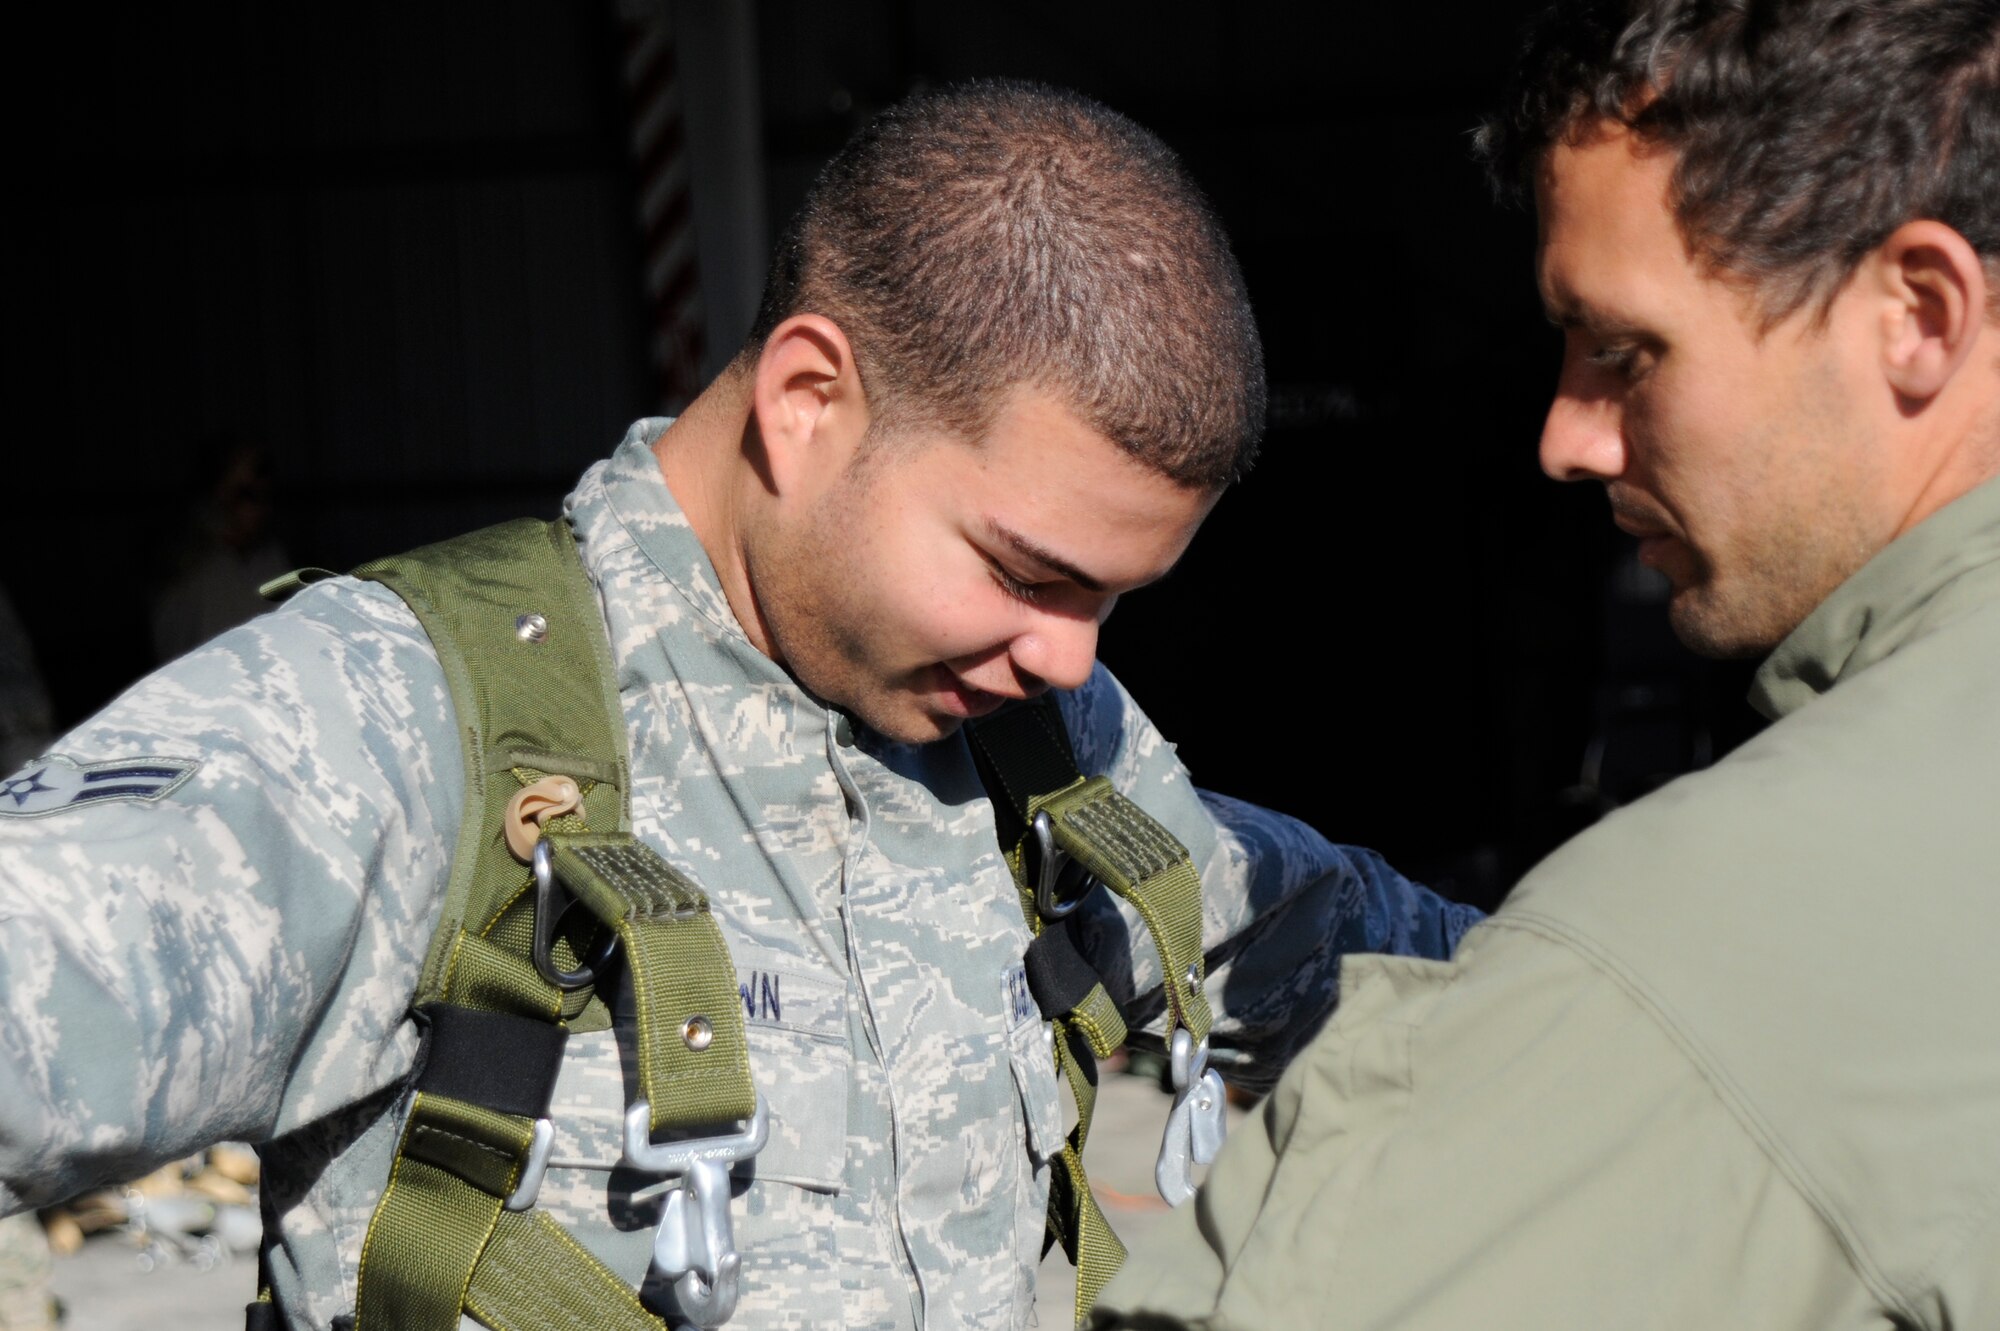 VANDENBERG AIR FORCE BASE, Calif. -- Airman 1st Class Joshua Brown, 30th Medical Operations Squadron medical technician, gets a final check from an Air Force pararescueman during a tandem jump training exercise at the flightline here Wednesday, June 27, 2012. The training held certifies the pararescuemen to maintain their jump qualifications. (U.S. Air Force photo/Staff Sgt. Andrew Satran) 

 